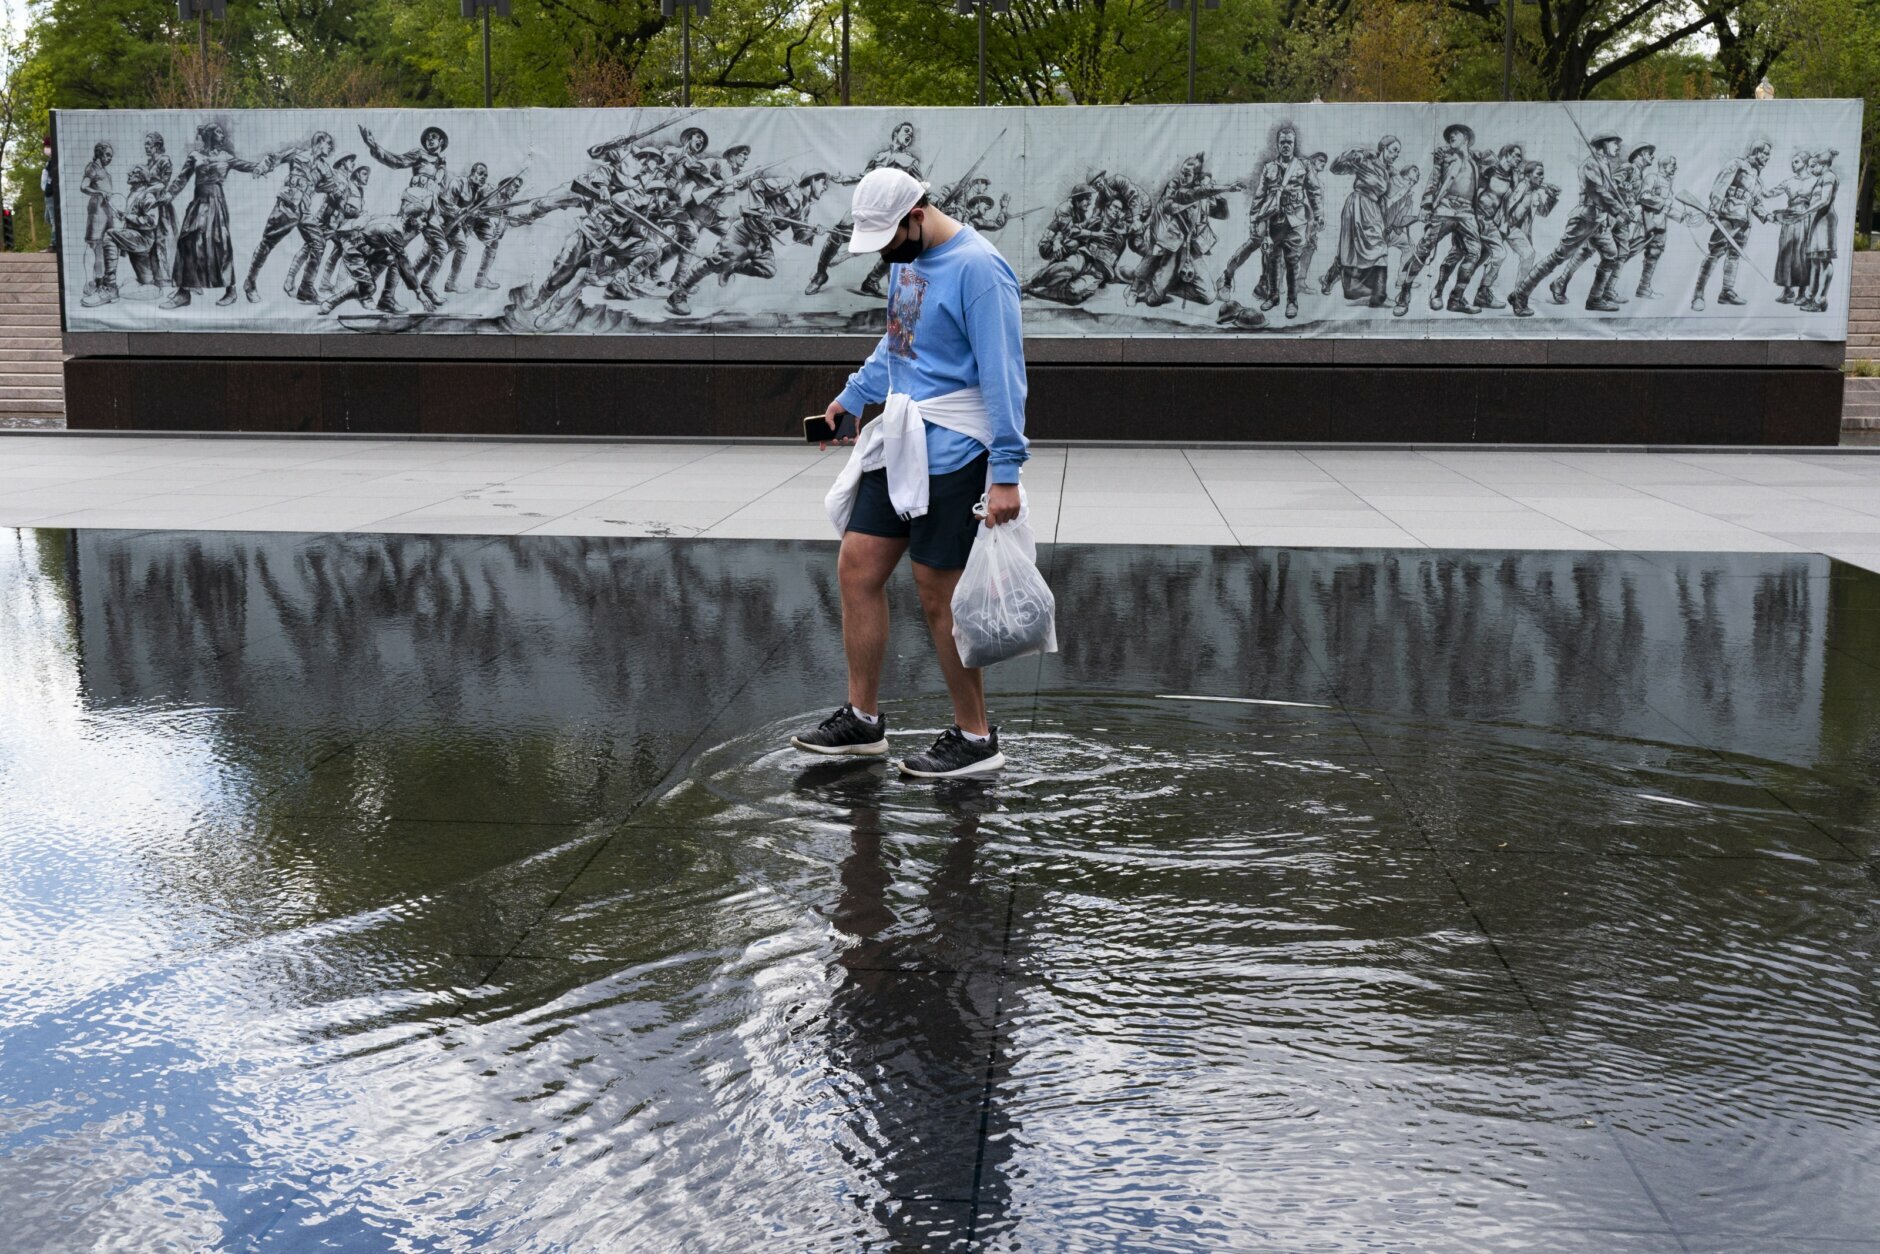 A man walks across a shallow water feature at the newly opened World War I Memorial, Friday, April 16, 2021, in Washington. (AP Photo/Jacquelyn Martin)